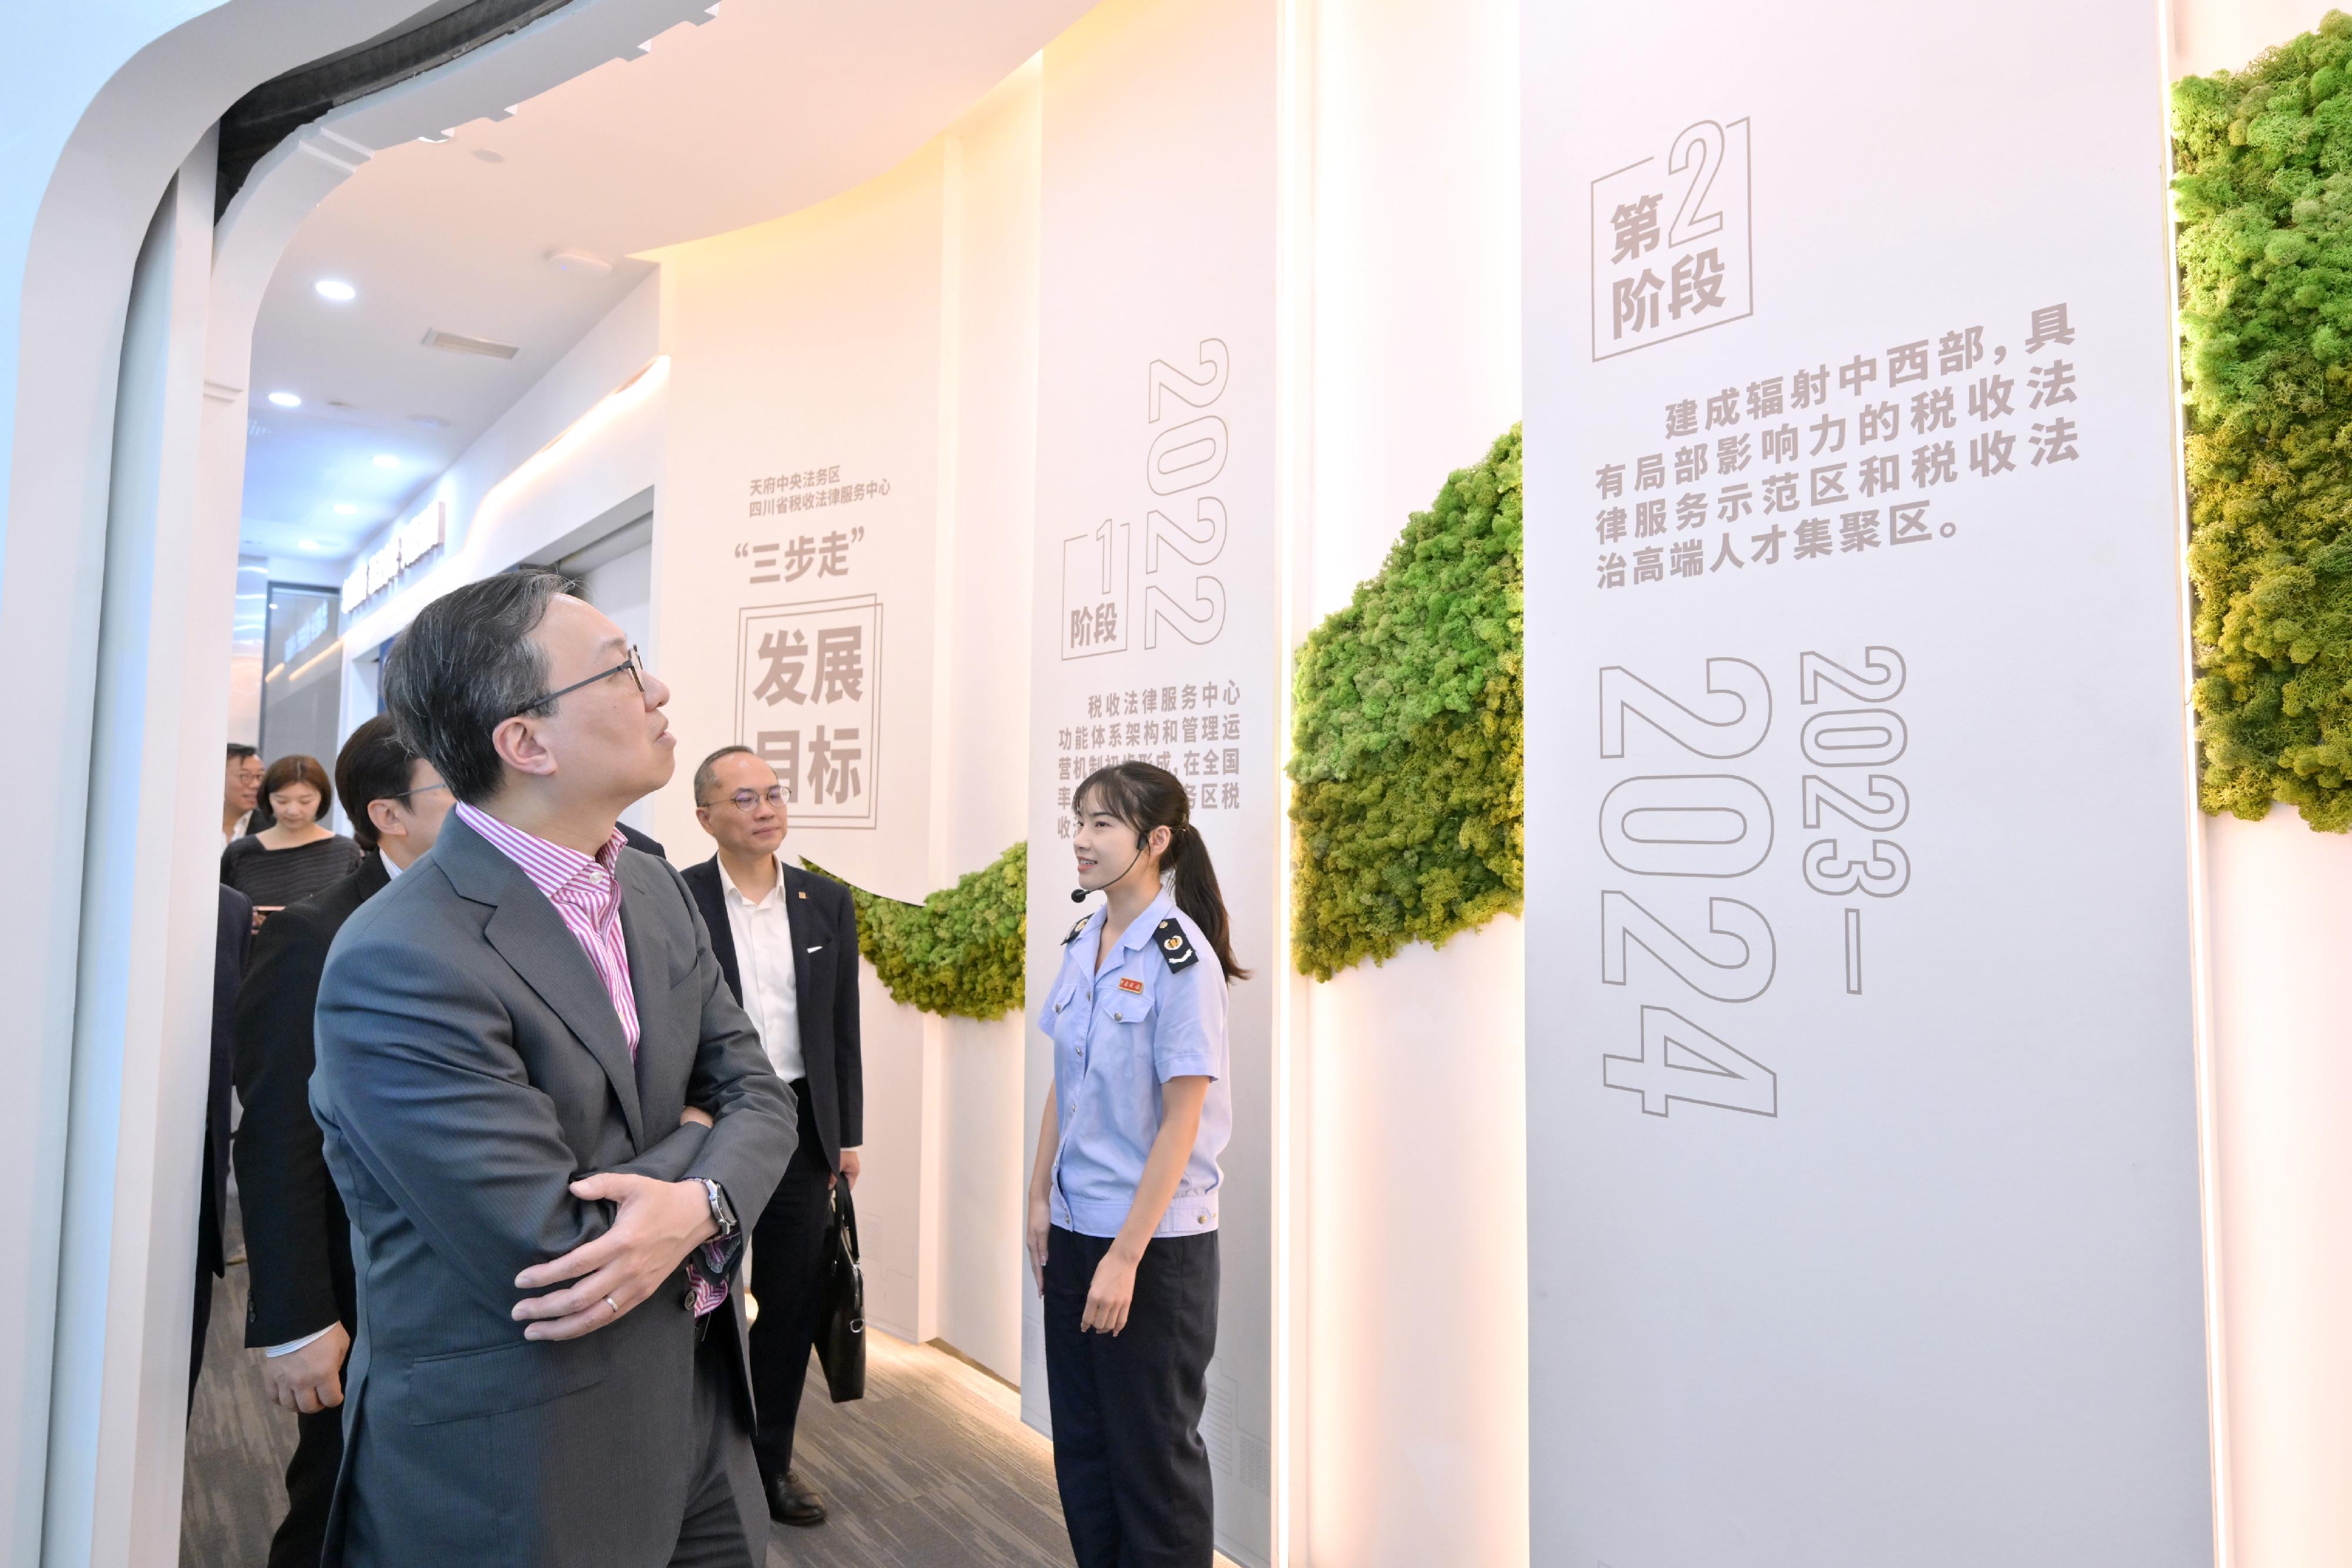 The Secretary for Justice, Mr Paul Lam, SC, led a delegation from Hong Kong's legal and dispute resolution sector to visit Tianfu Central Legal Services District in Chengdu on August 23. Photo shows Mr Lam (left) looking at exhibition panels on Tianfu Central Legal Services District for a better understanding of its development.
